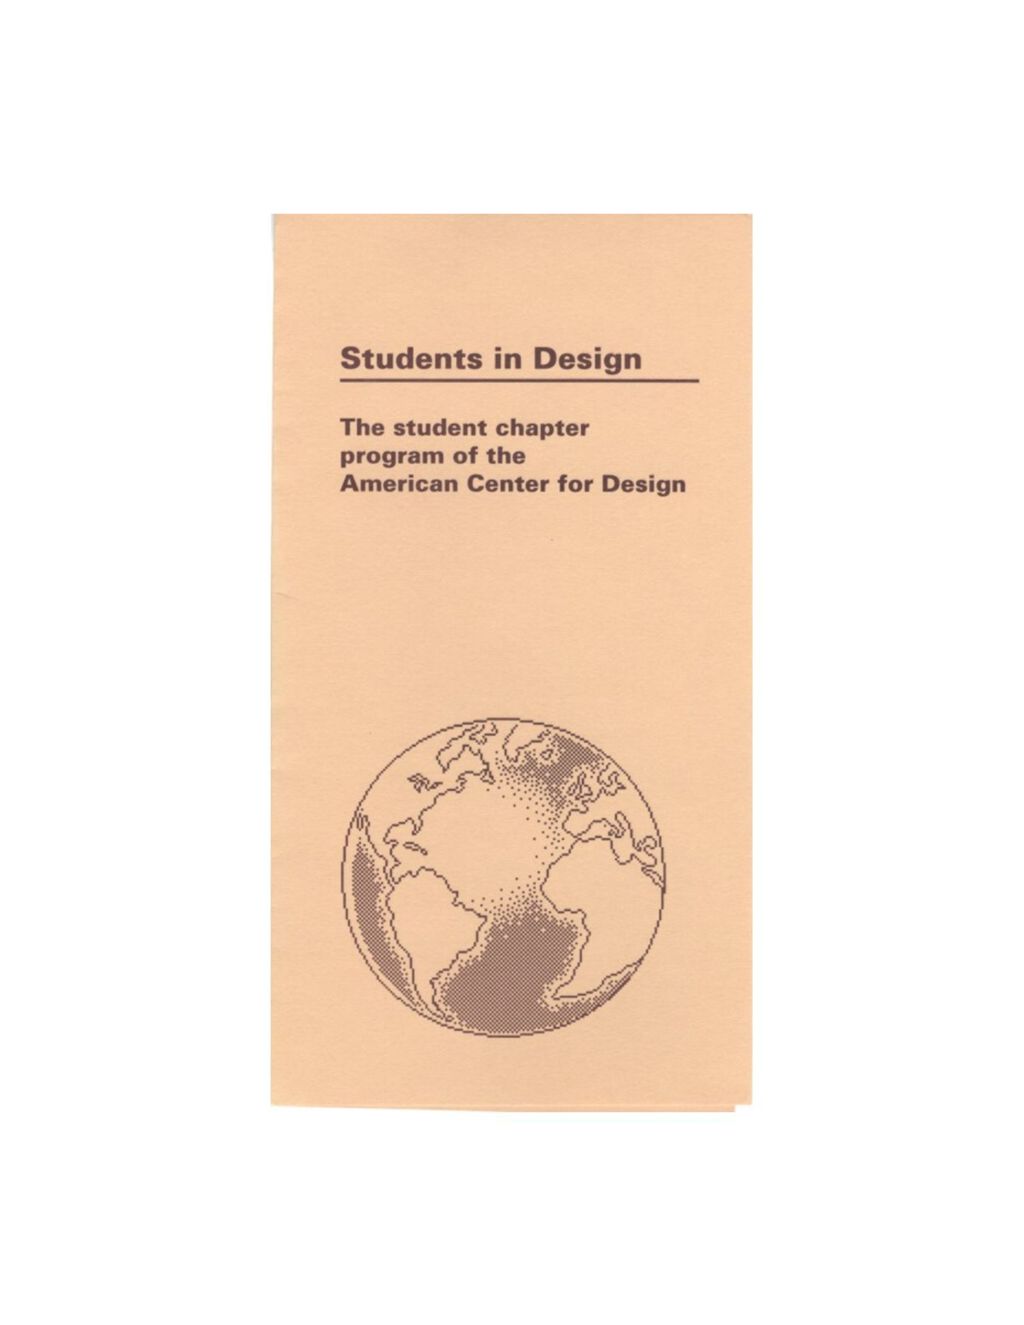 Students in design: the student chapter program of the American Center for Design